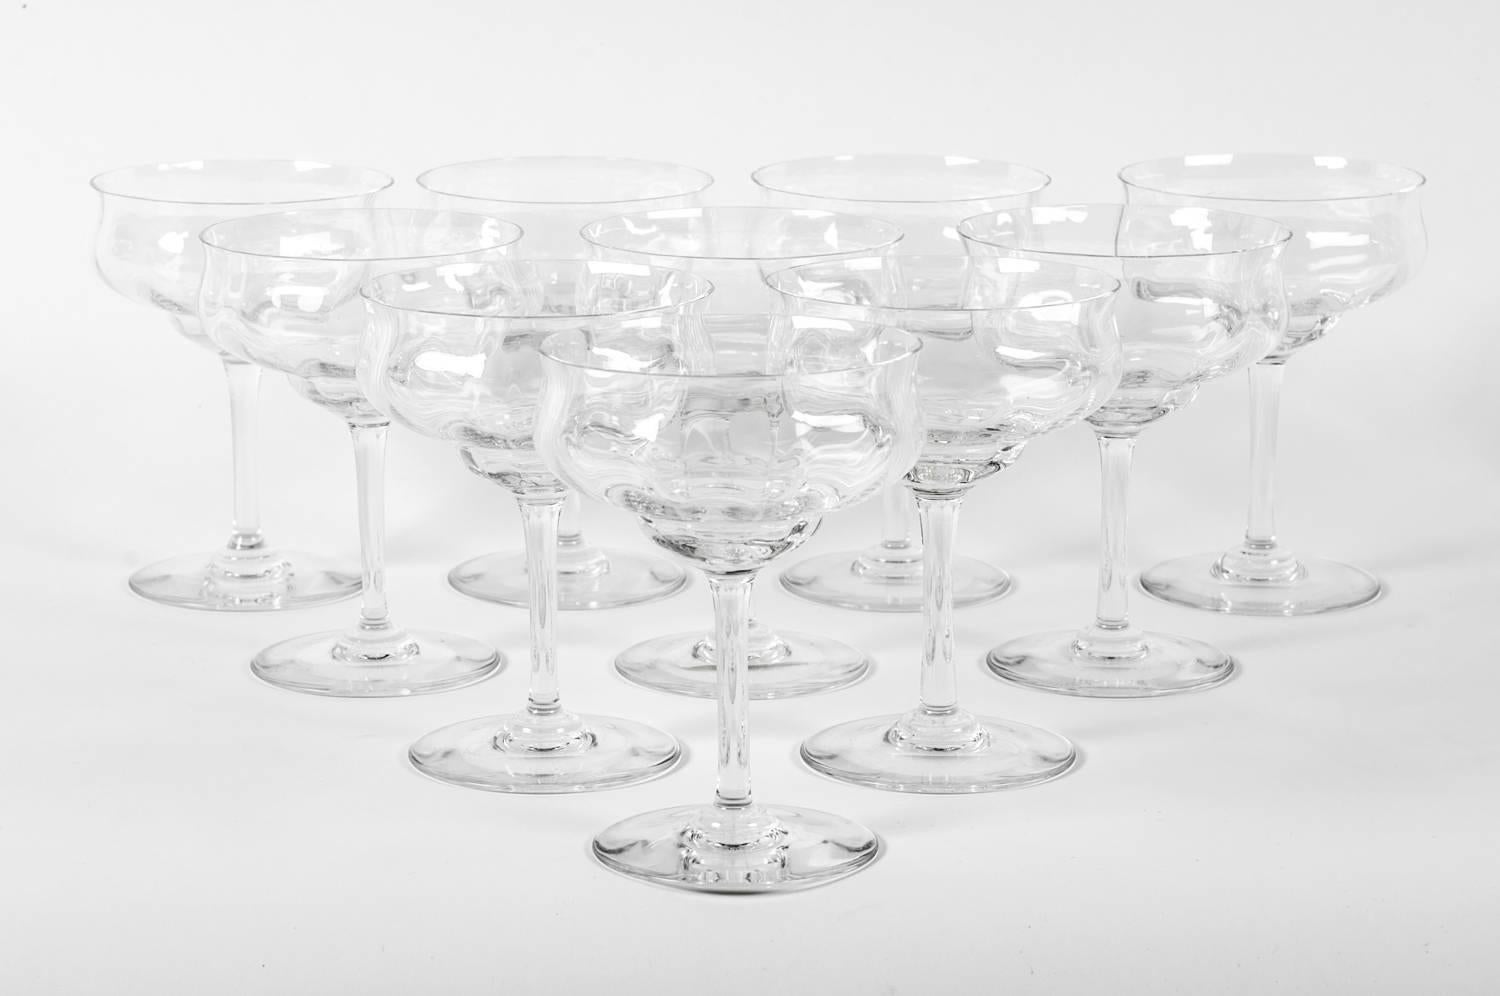 Vintage Baccarat crystal set of ten champagne or martini crystal coupes. Just exquisitely beautiful, these coupes would bring a great addition to any table or bar. Maker's mark acid etched on the base of each glass. We have three set of ten all in